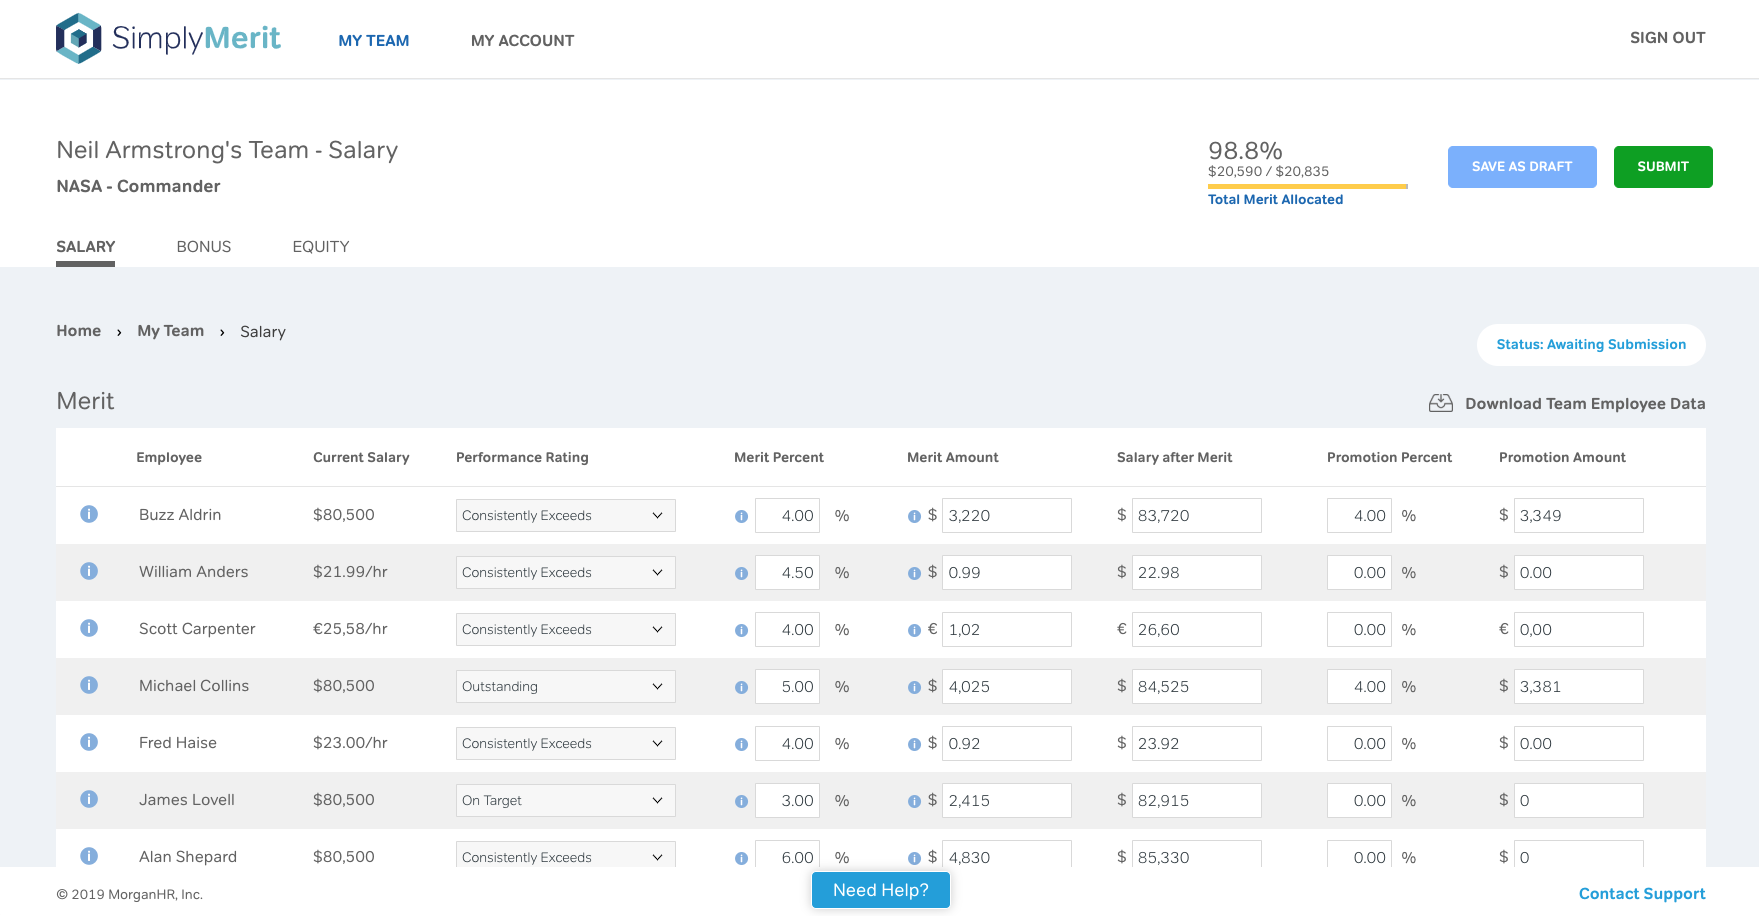 Highly customizable manager experience for managing merit, bonuses, and equity grants.